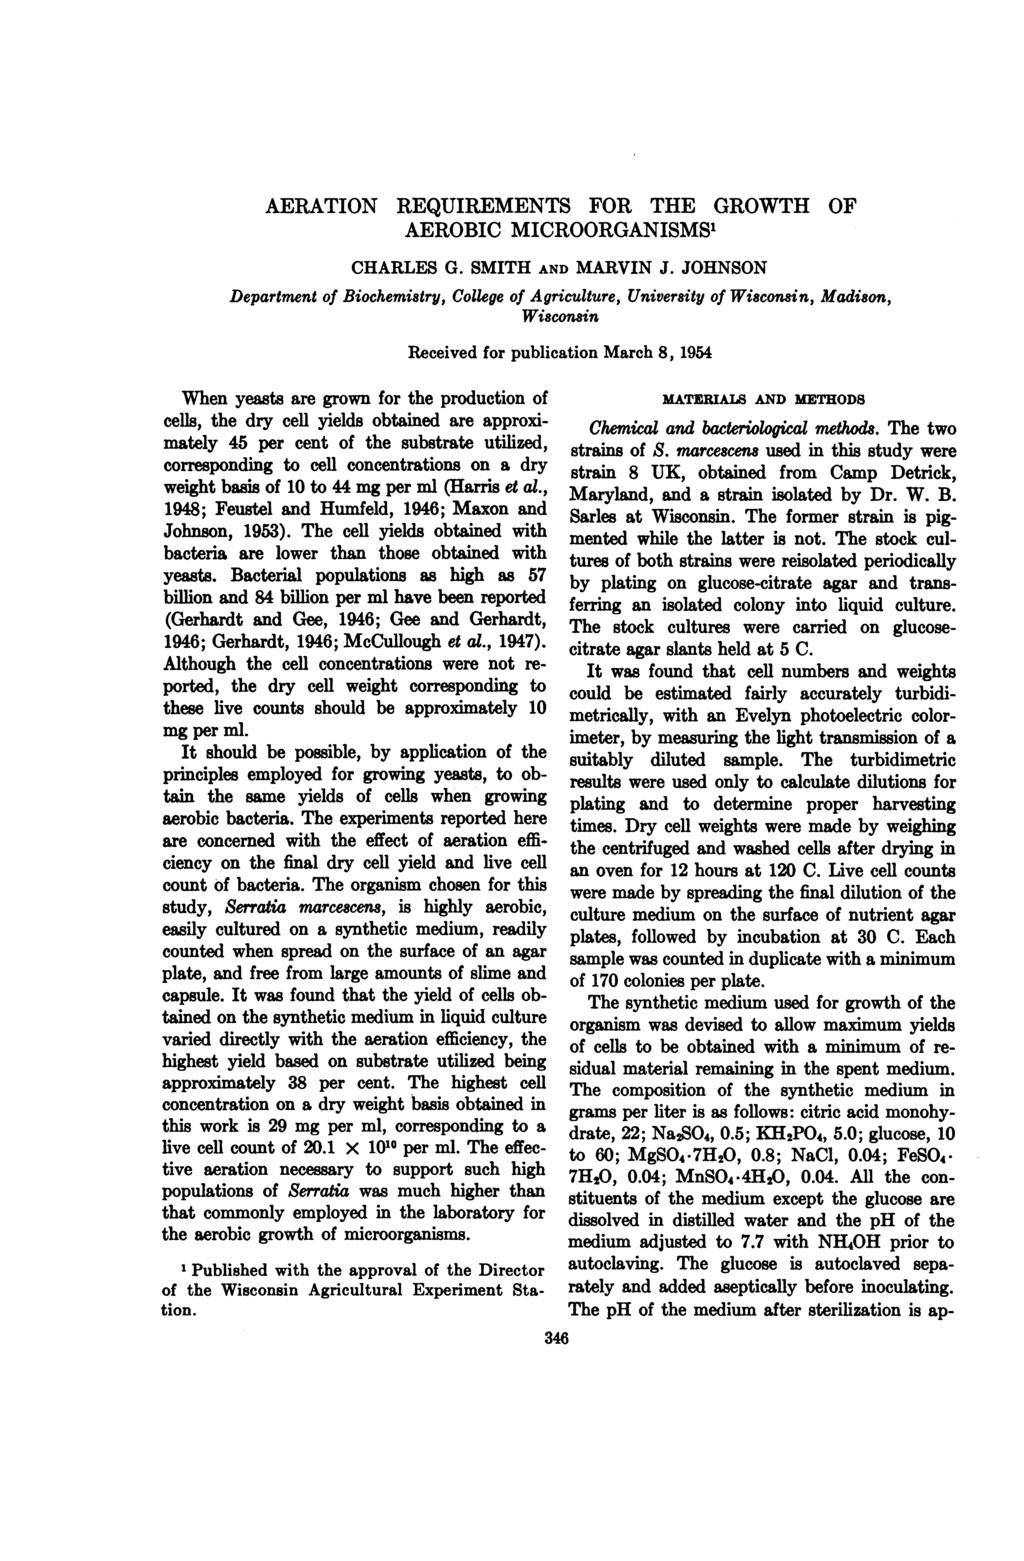 AERATION REQUIREMENTS FOR THE GROWTH OF AEROBIC MICROORGANISMS1 CHARLES G. SMITH AND MARVIN J.